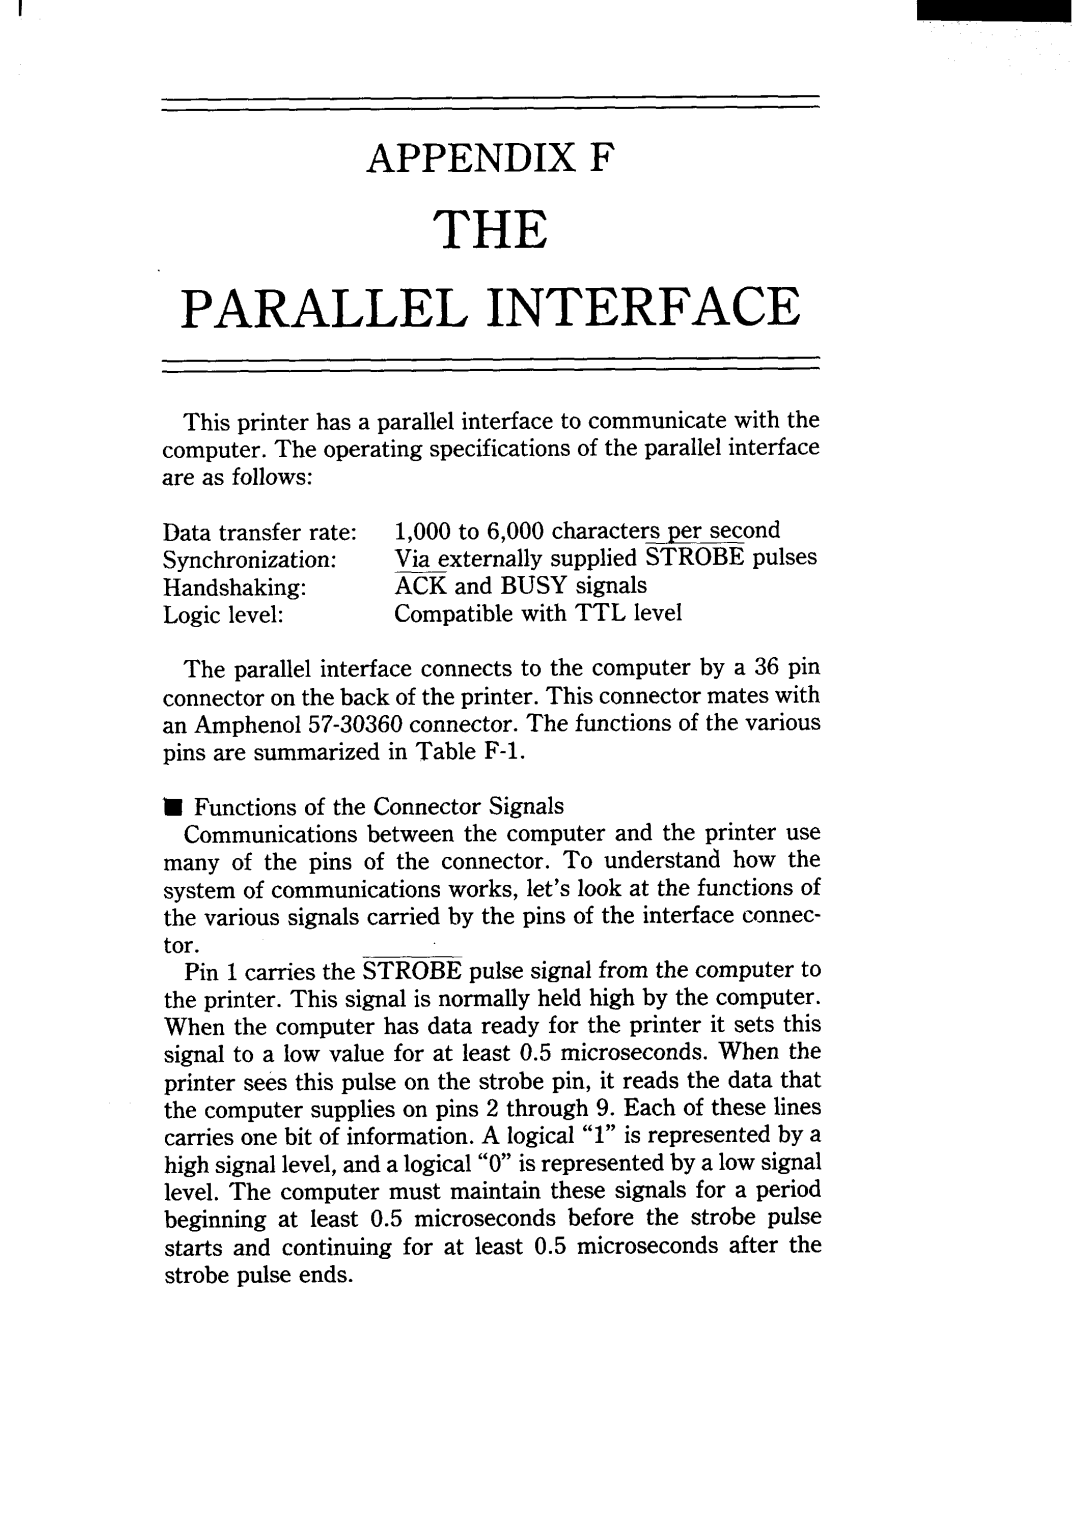 Star Micronics NX-15 user manual The Parallel Interface, Appendix F 